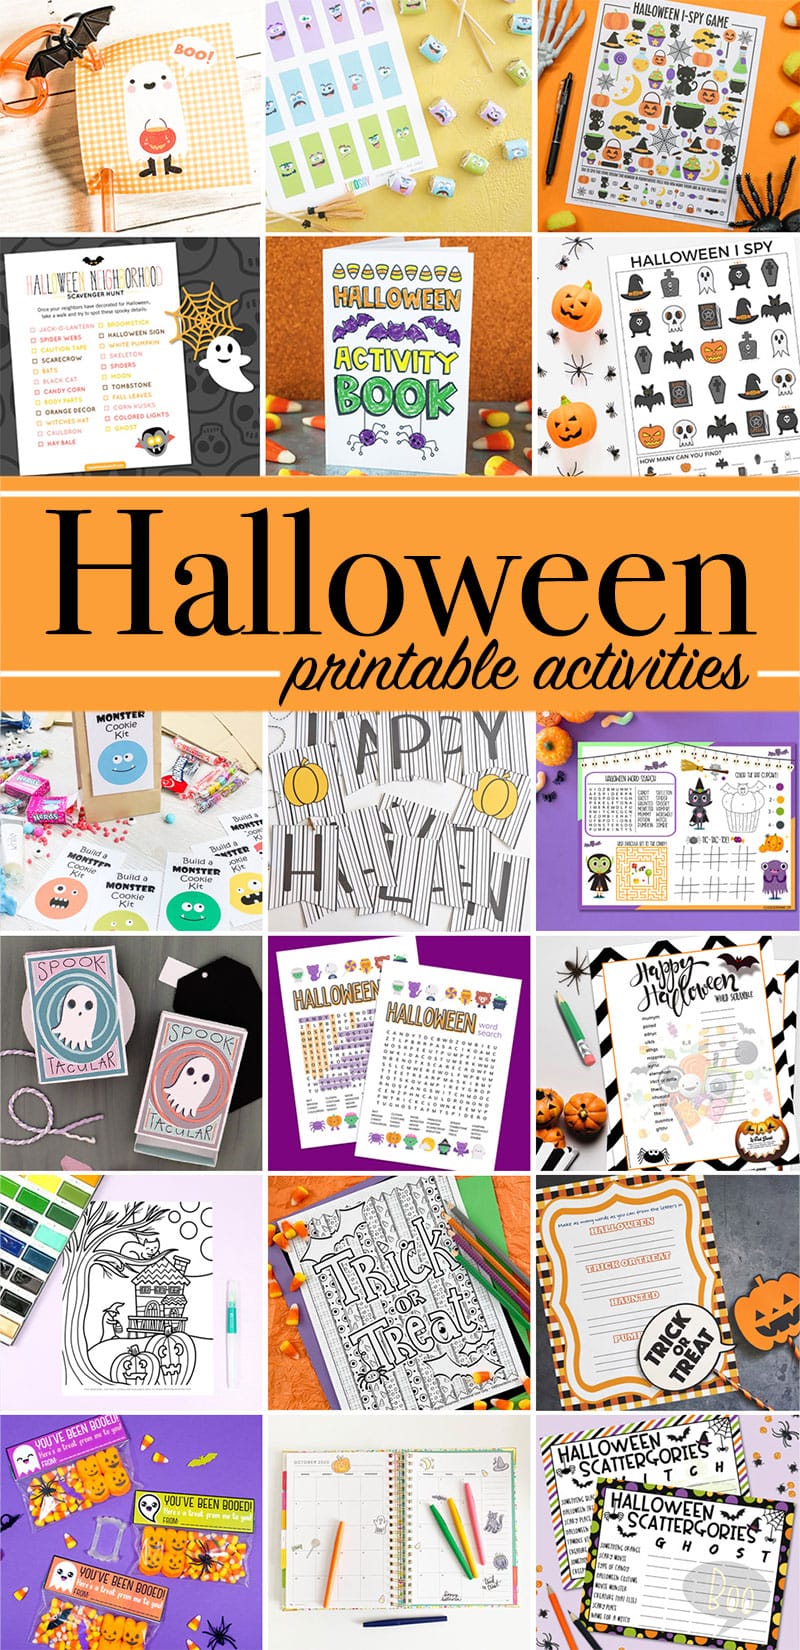 Printable Halloween activities and coloring pages